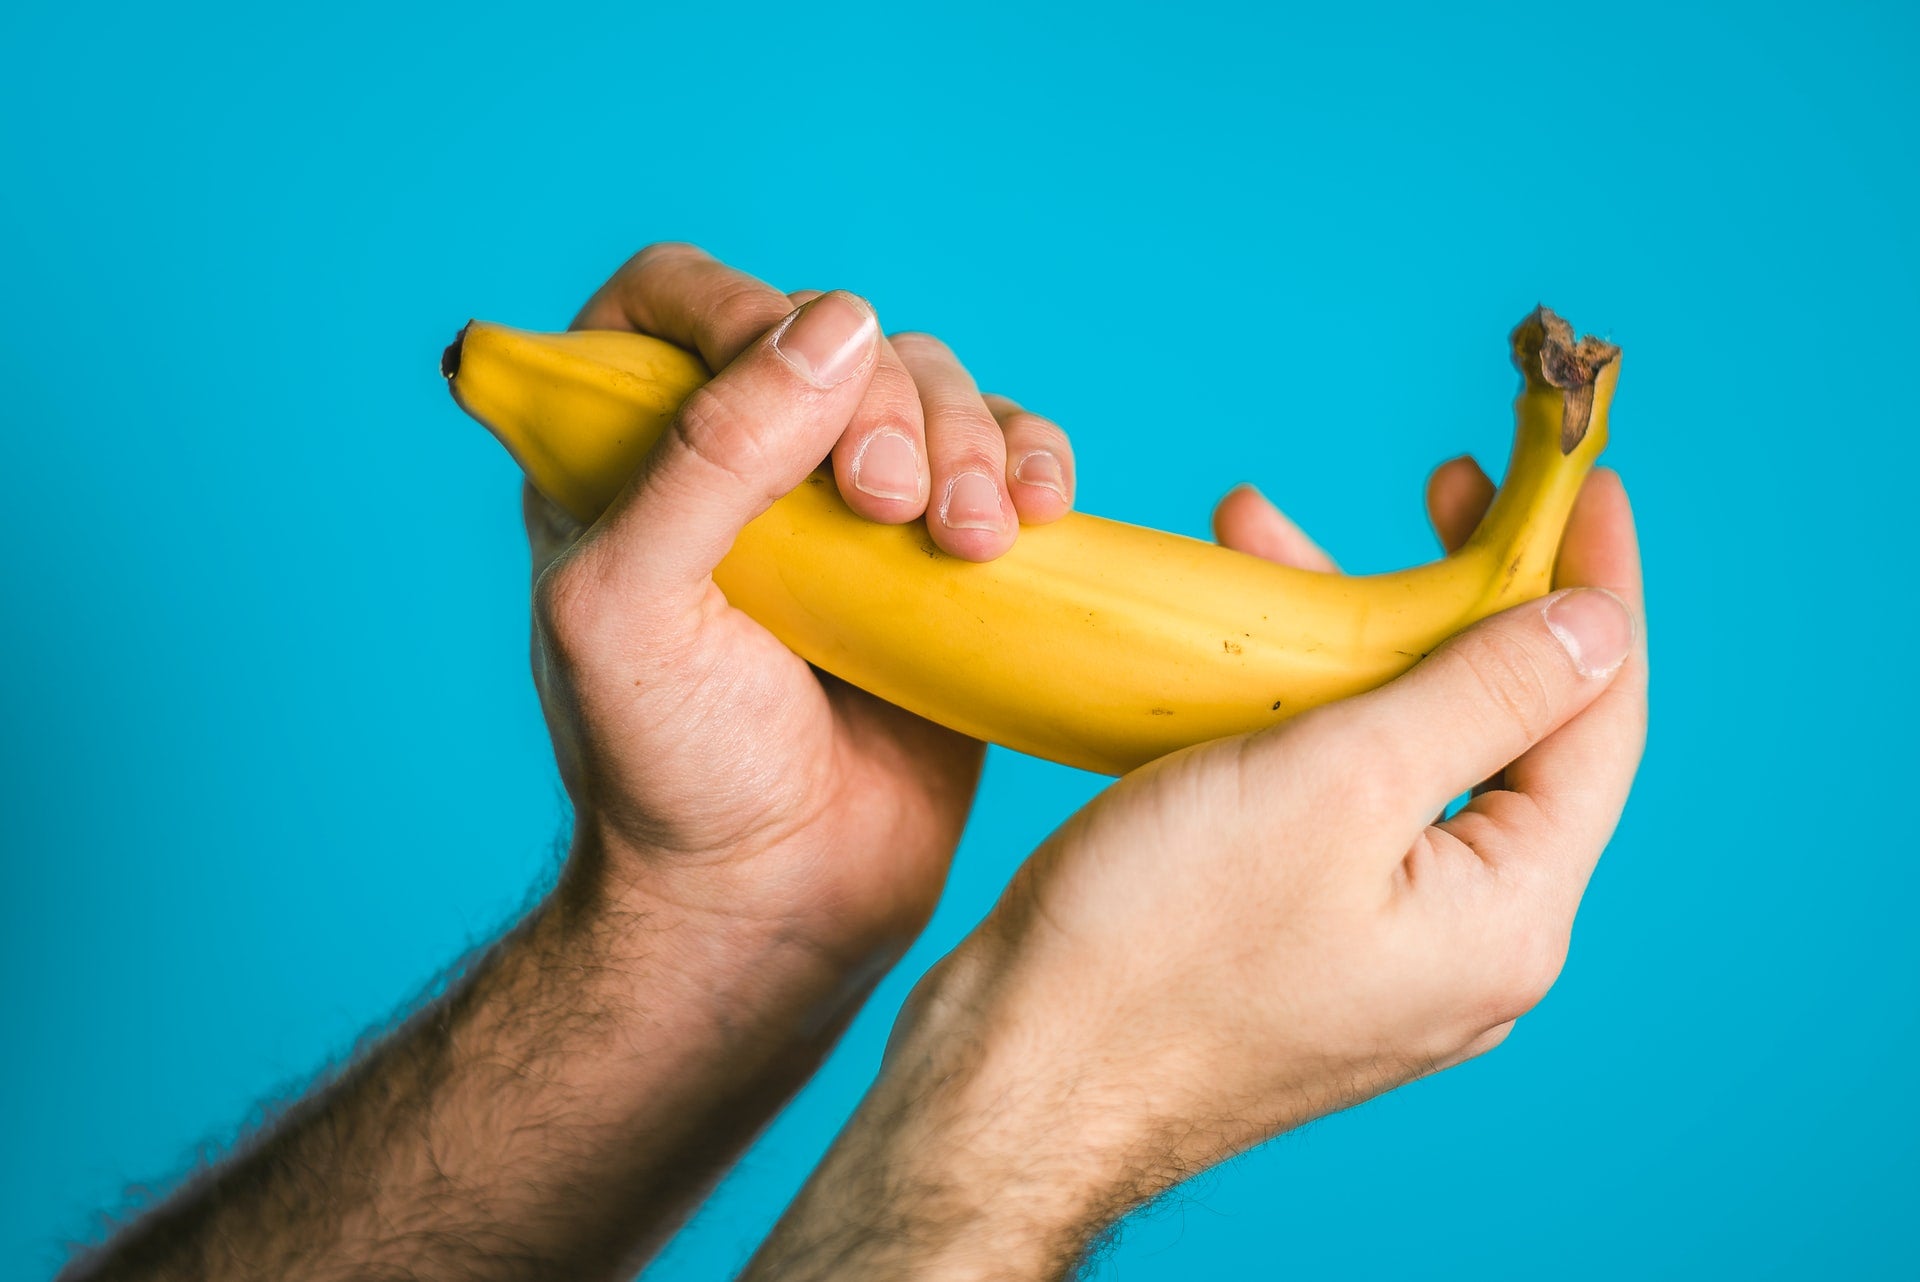 Banana in the hands of a person